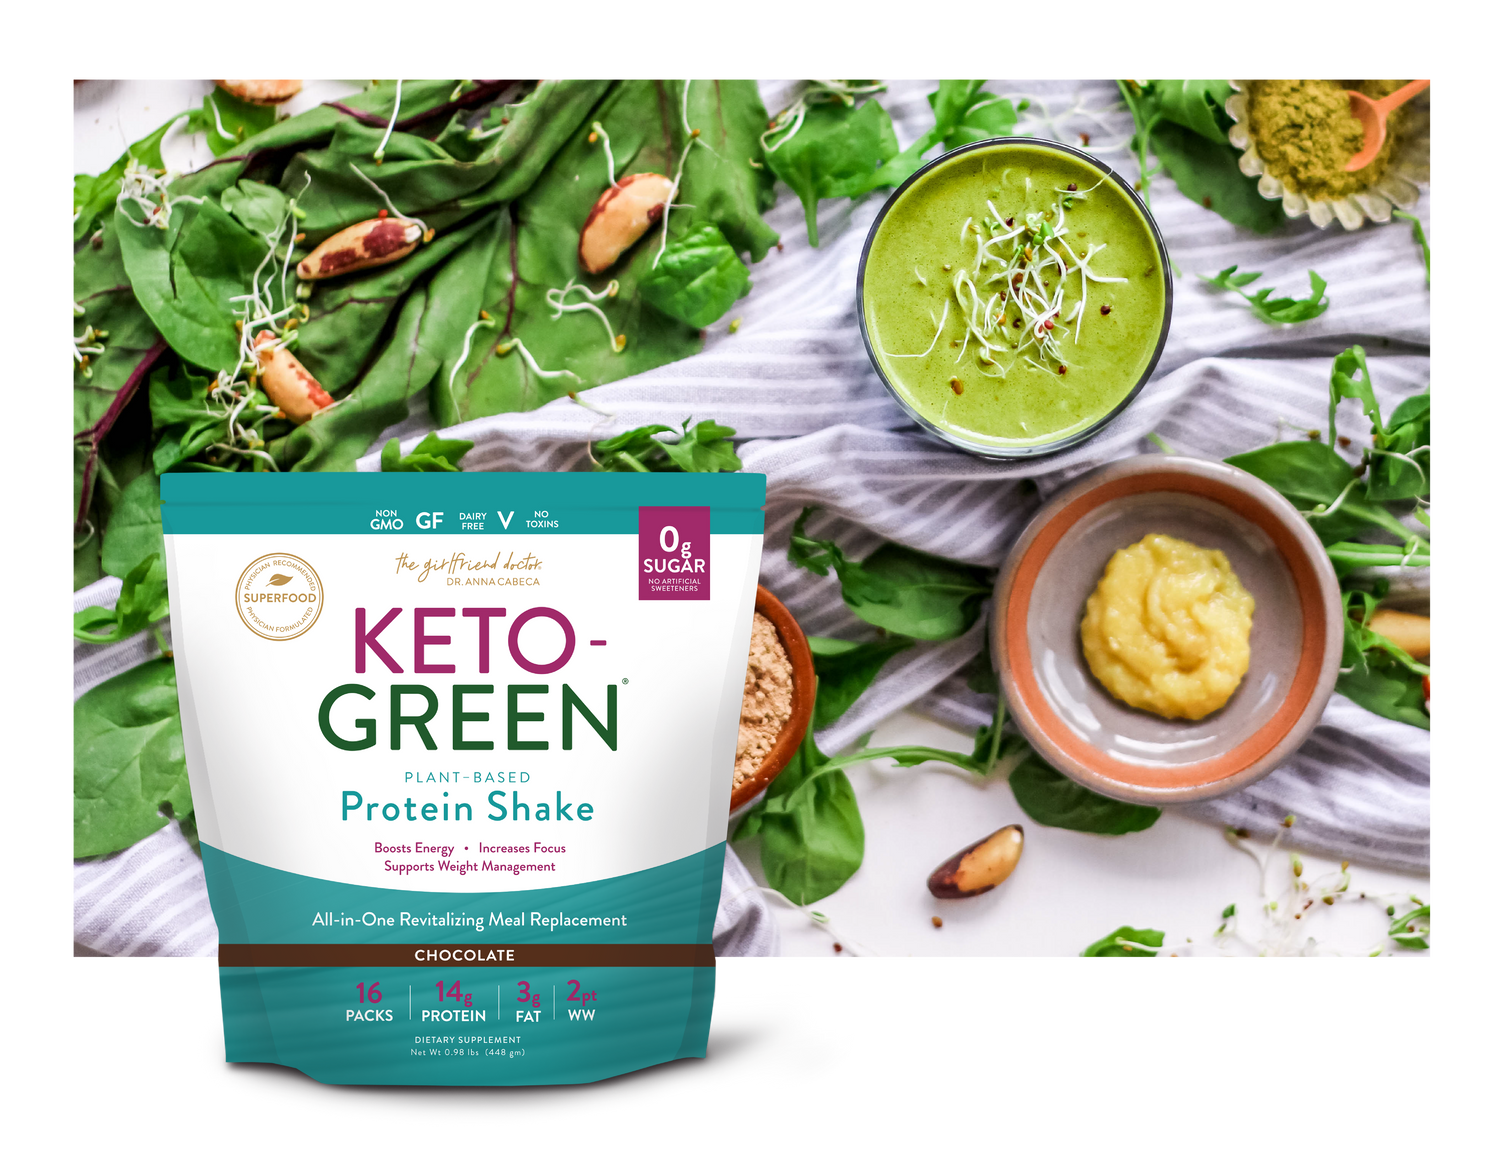 Bag of Keto-Green Protein Shake 16 Serving with plant based dishes in the background